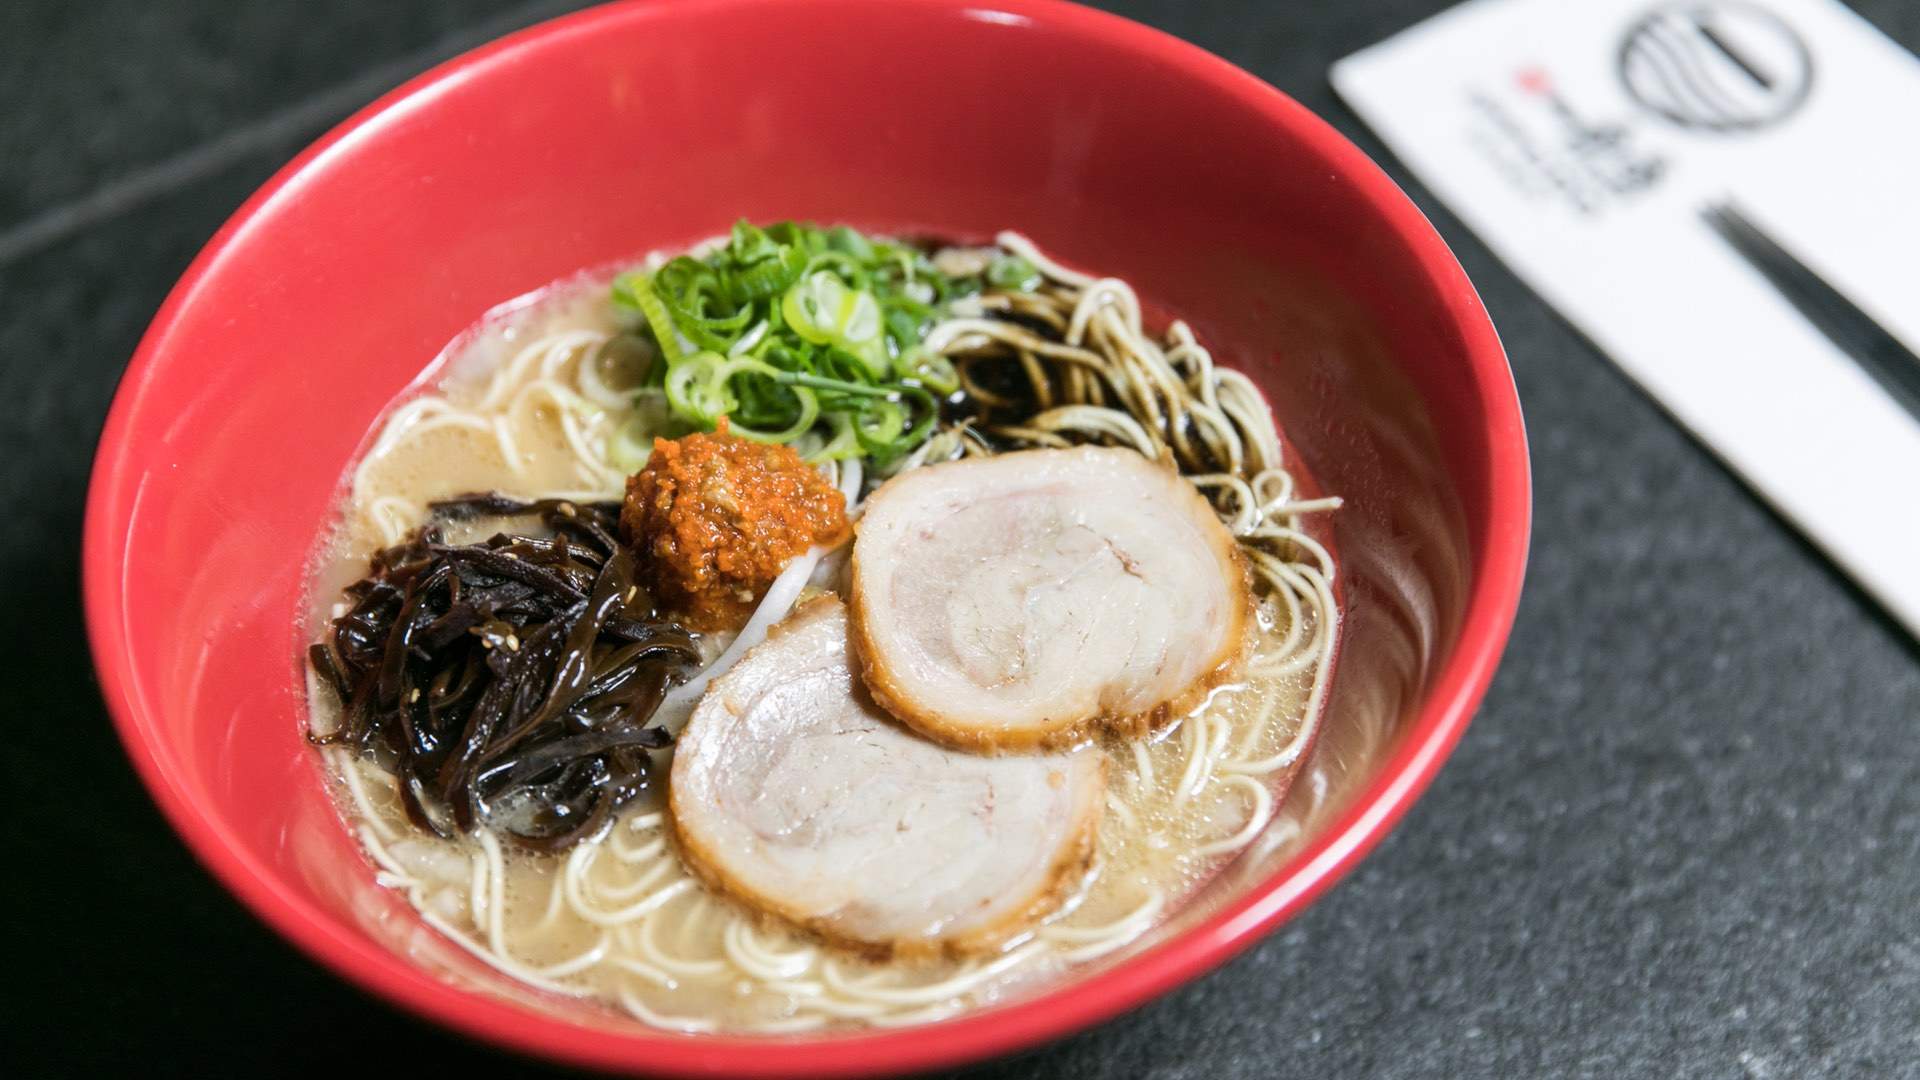 Global Very Good Ramen Place Ippudo Has Finally Opened in Melbourne